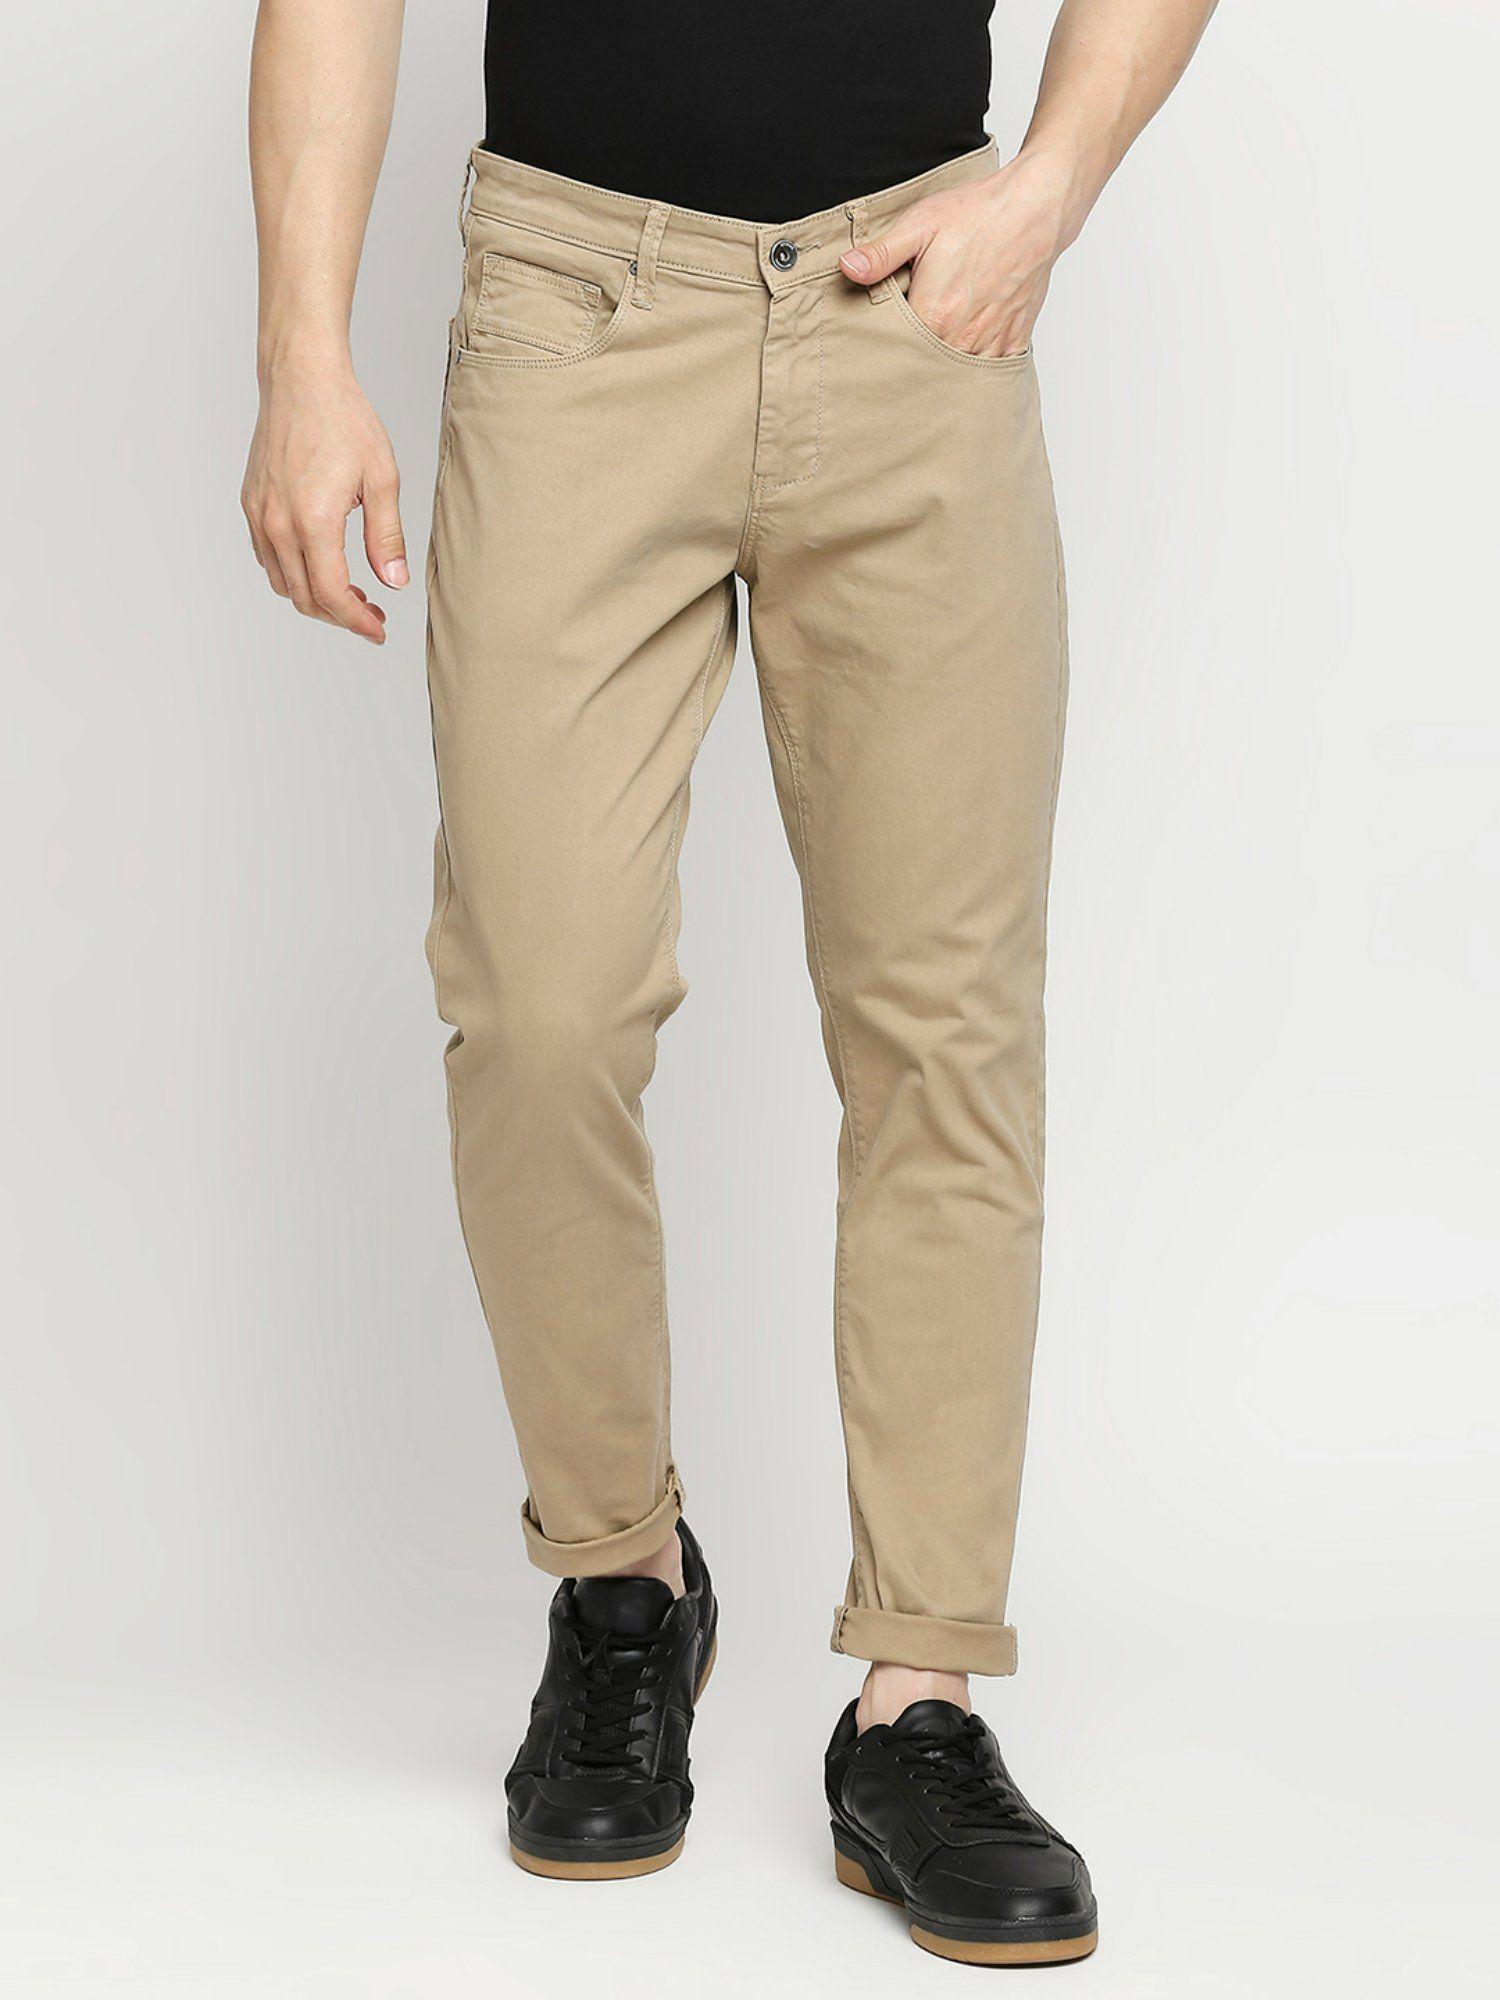 camel-khaki-cotton-slim-fit-tapered-length-trousers-for-men